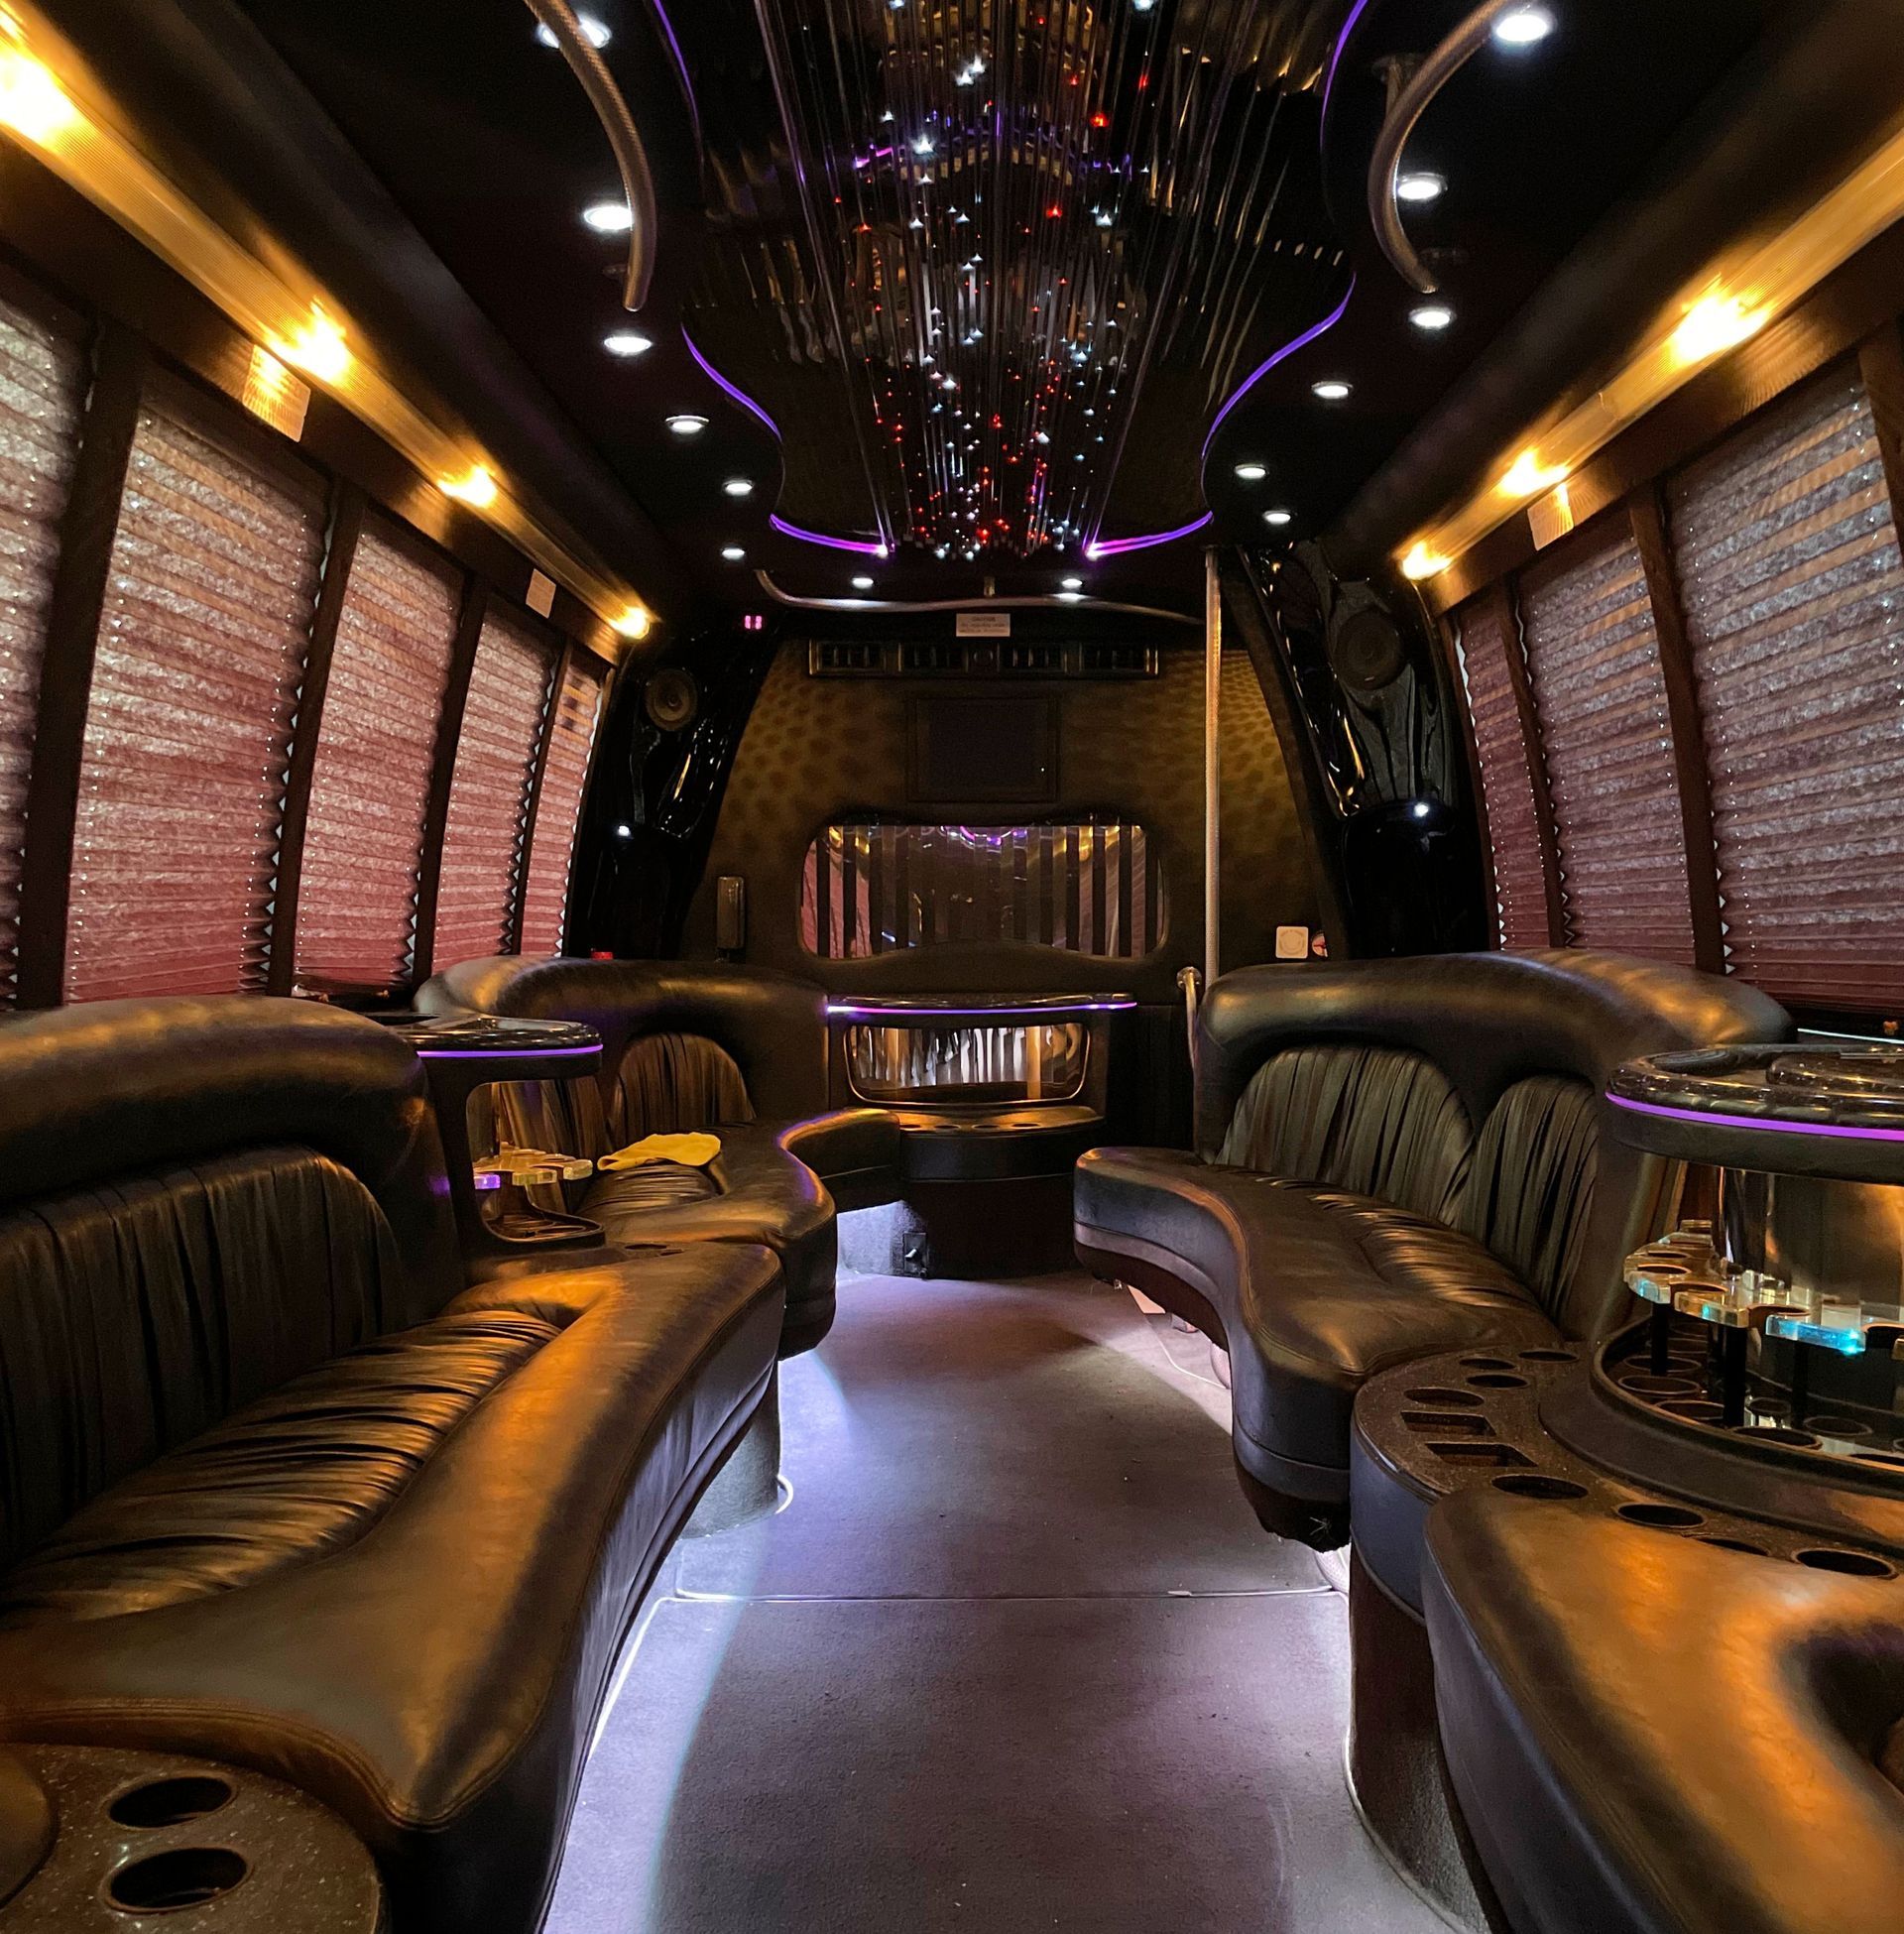 the inside of the Krystal Coach 24 passenger limousine with purple lights on the ceiling